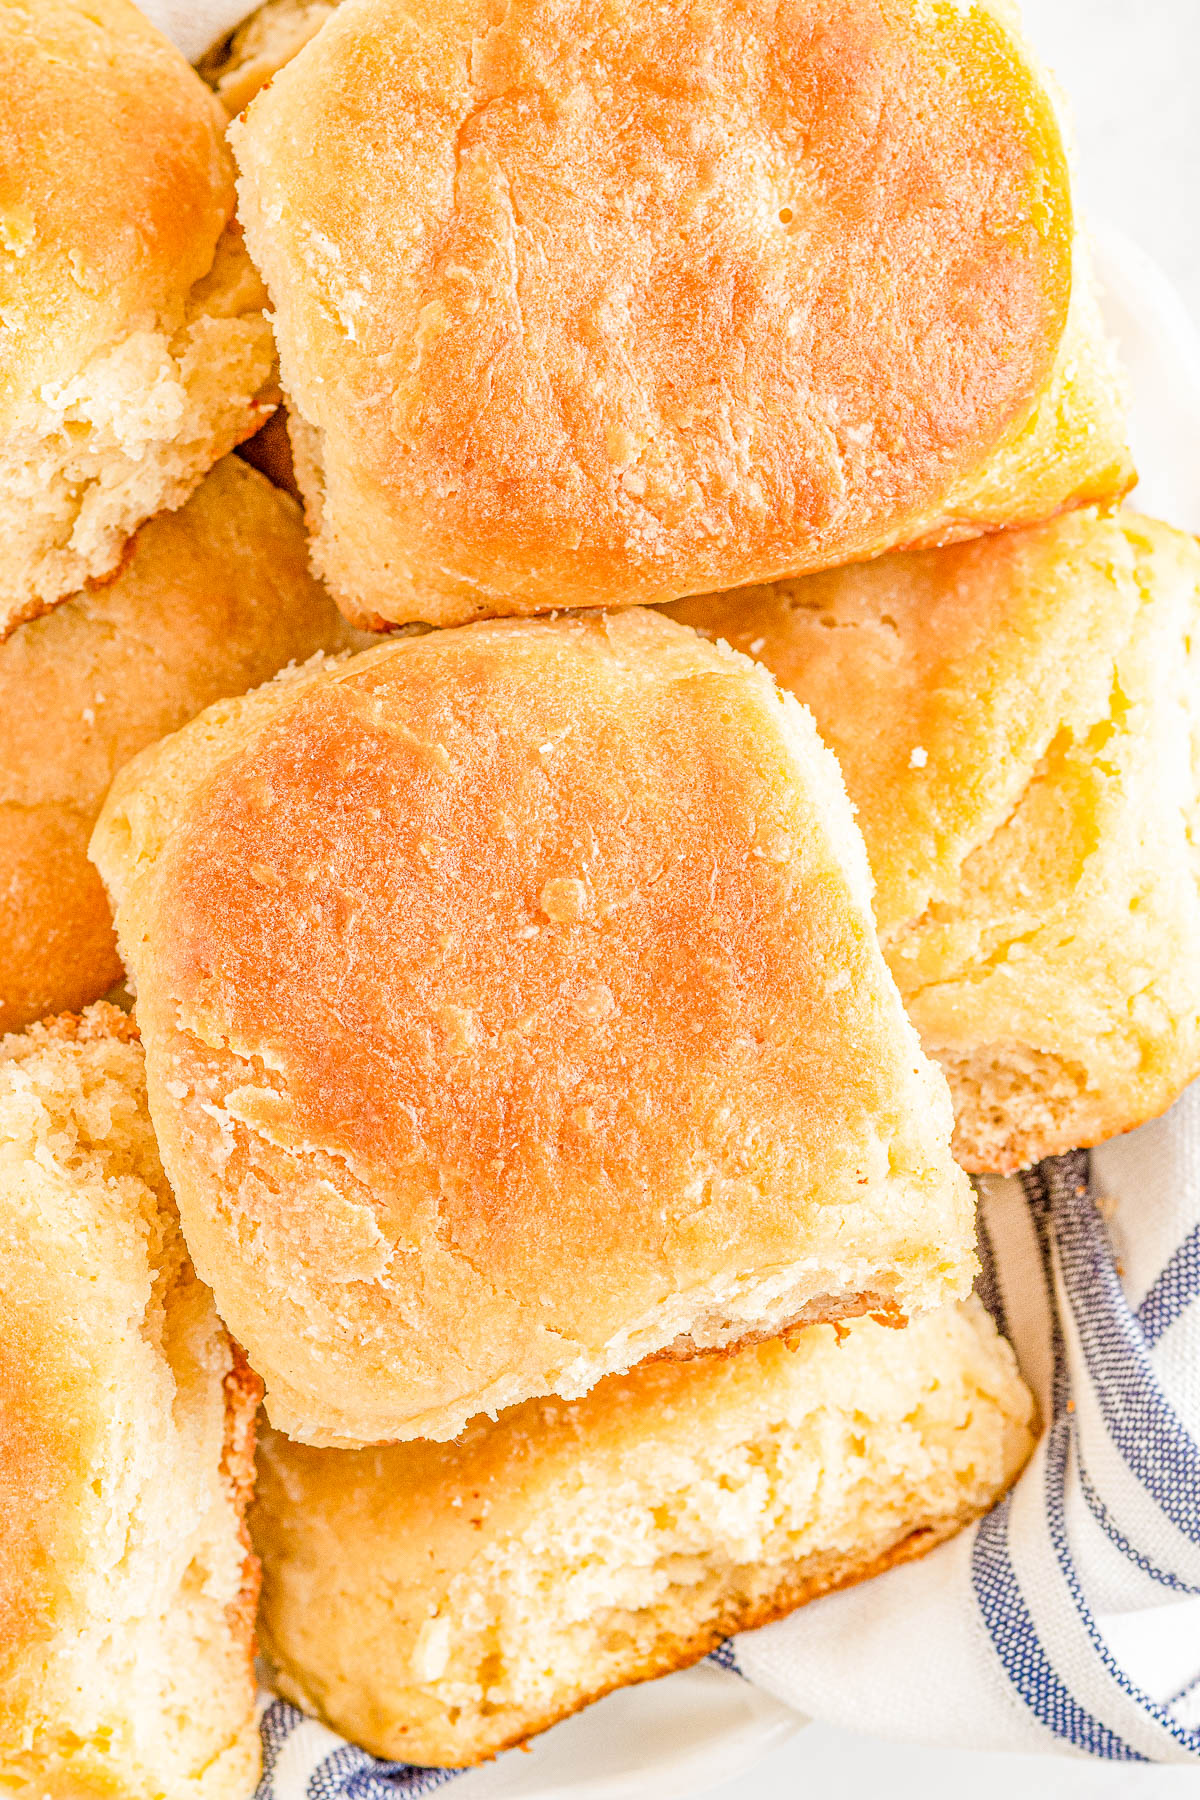 Angel Biscuits - The lightest, fluffiest, flakiest, melt-in-your-mouth biscuits you'll ever eat! Thanks to a trio of leavening agents, plenty of butter, and buttermilk, these EASY biscuits will become a family FAVORITE in no time! Serve them in place of regular biscuits or dinner rolls, or make them for a special brunch or holiday meal, and I promise no one will eat just one! 